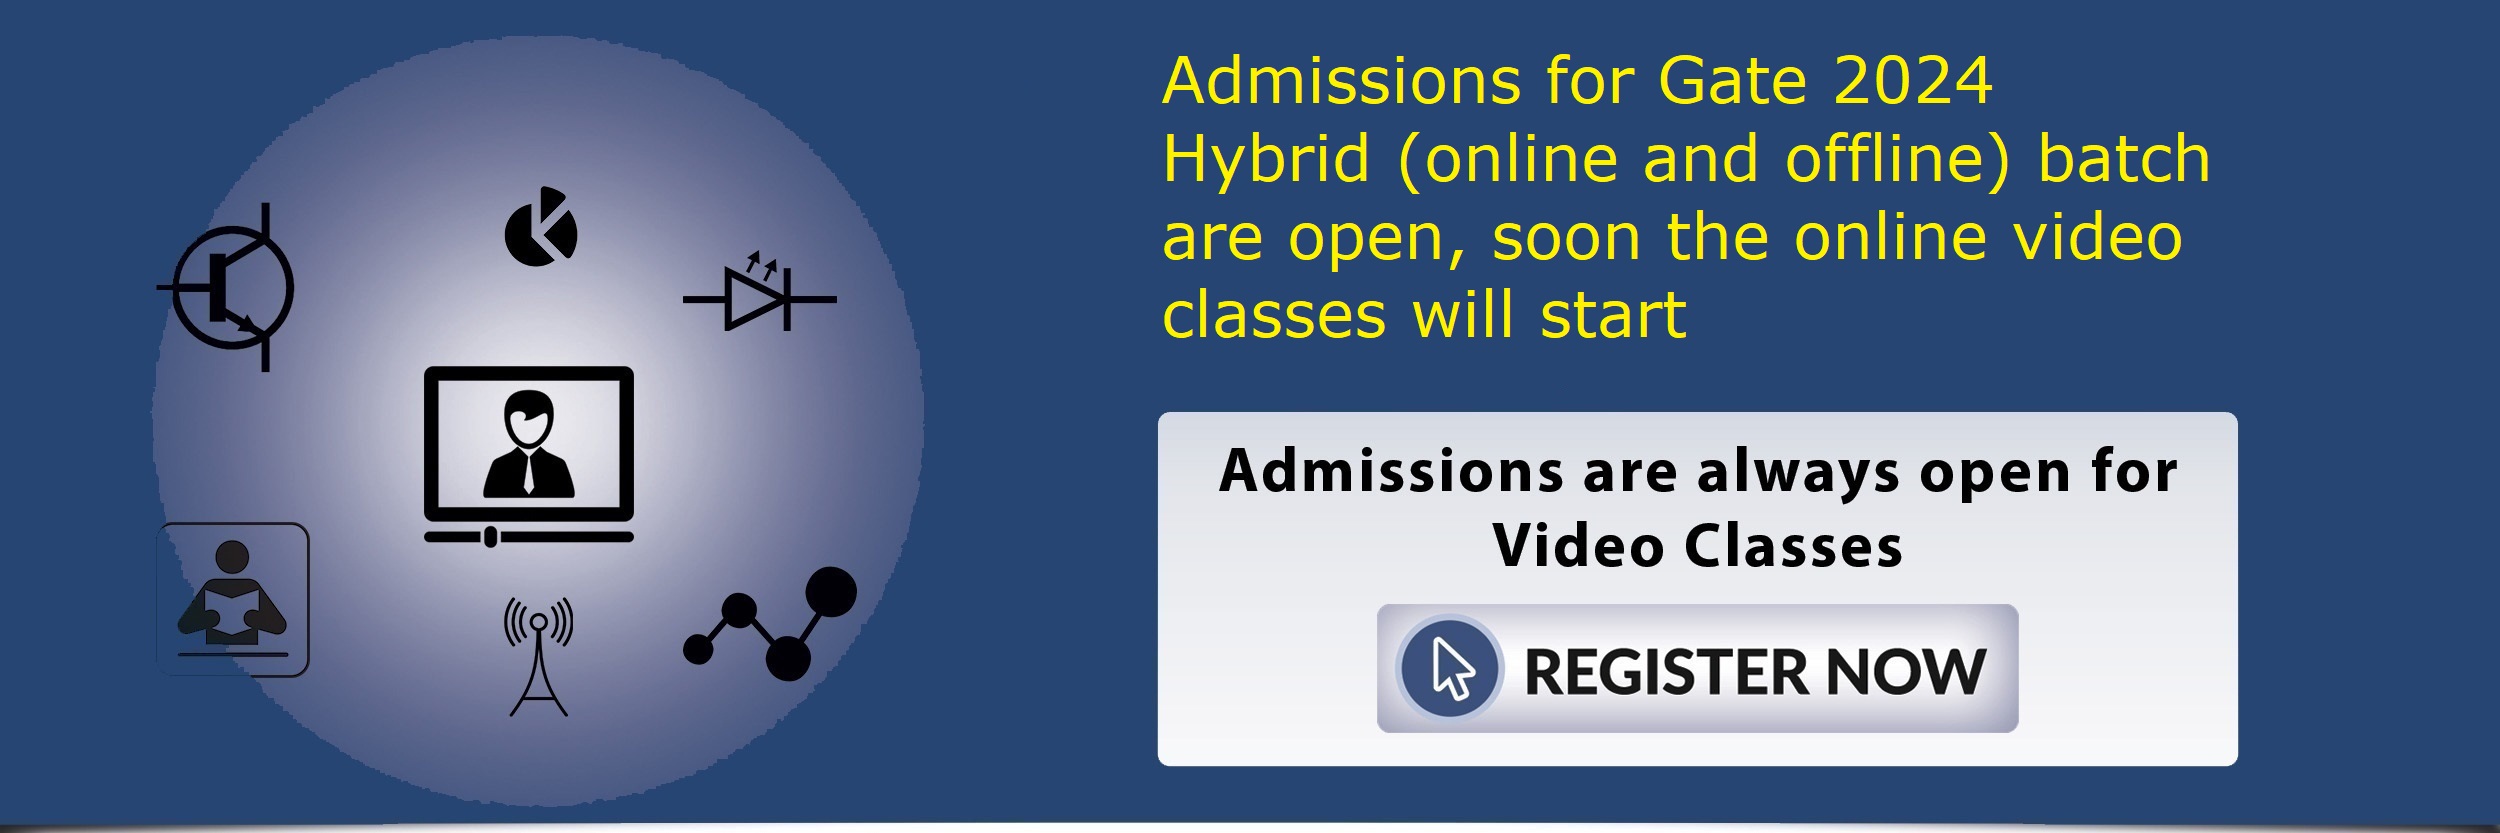 Admissions open for Hybrid GATE-2024